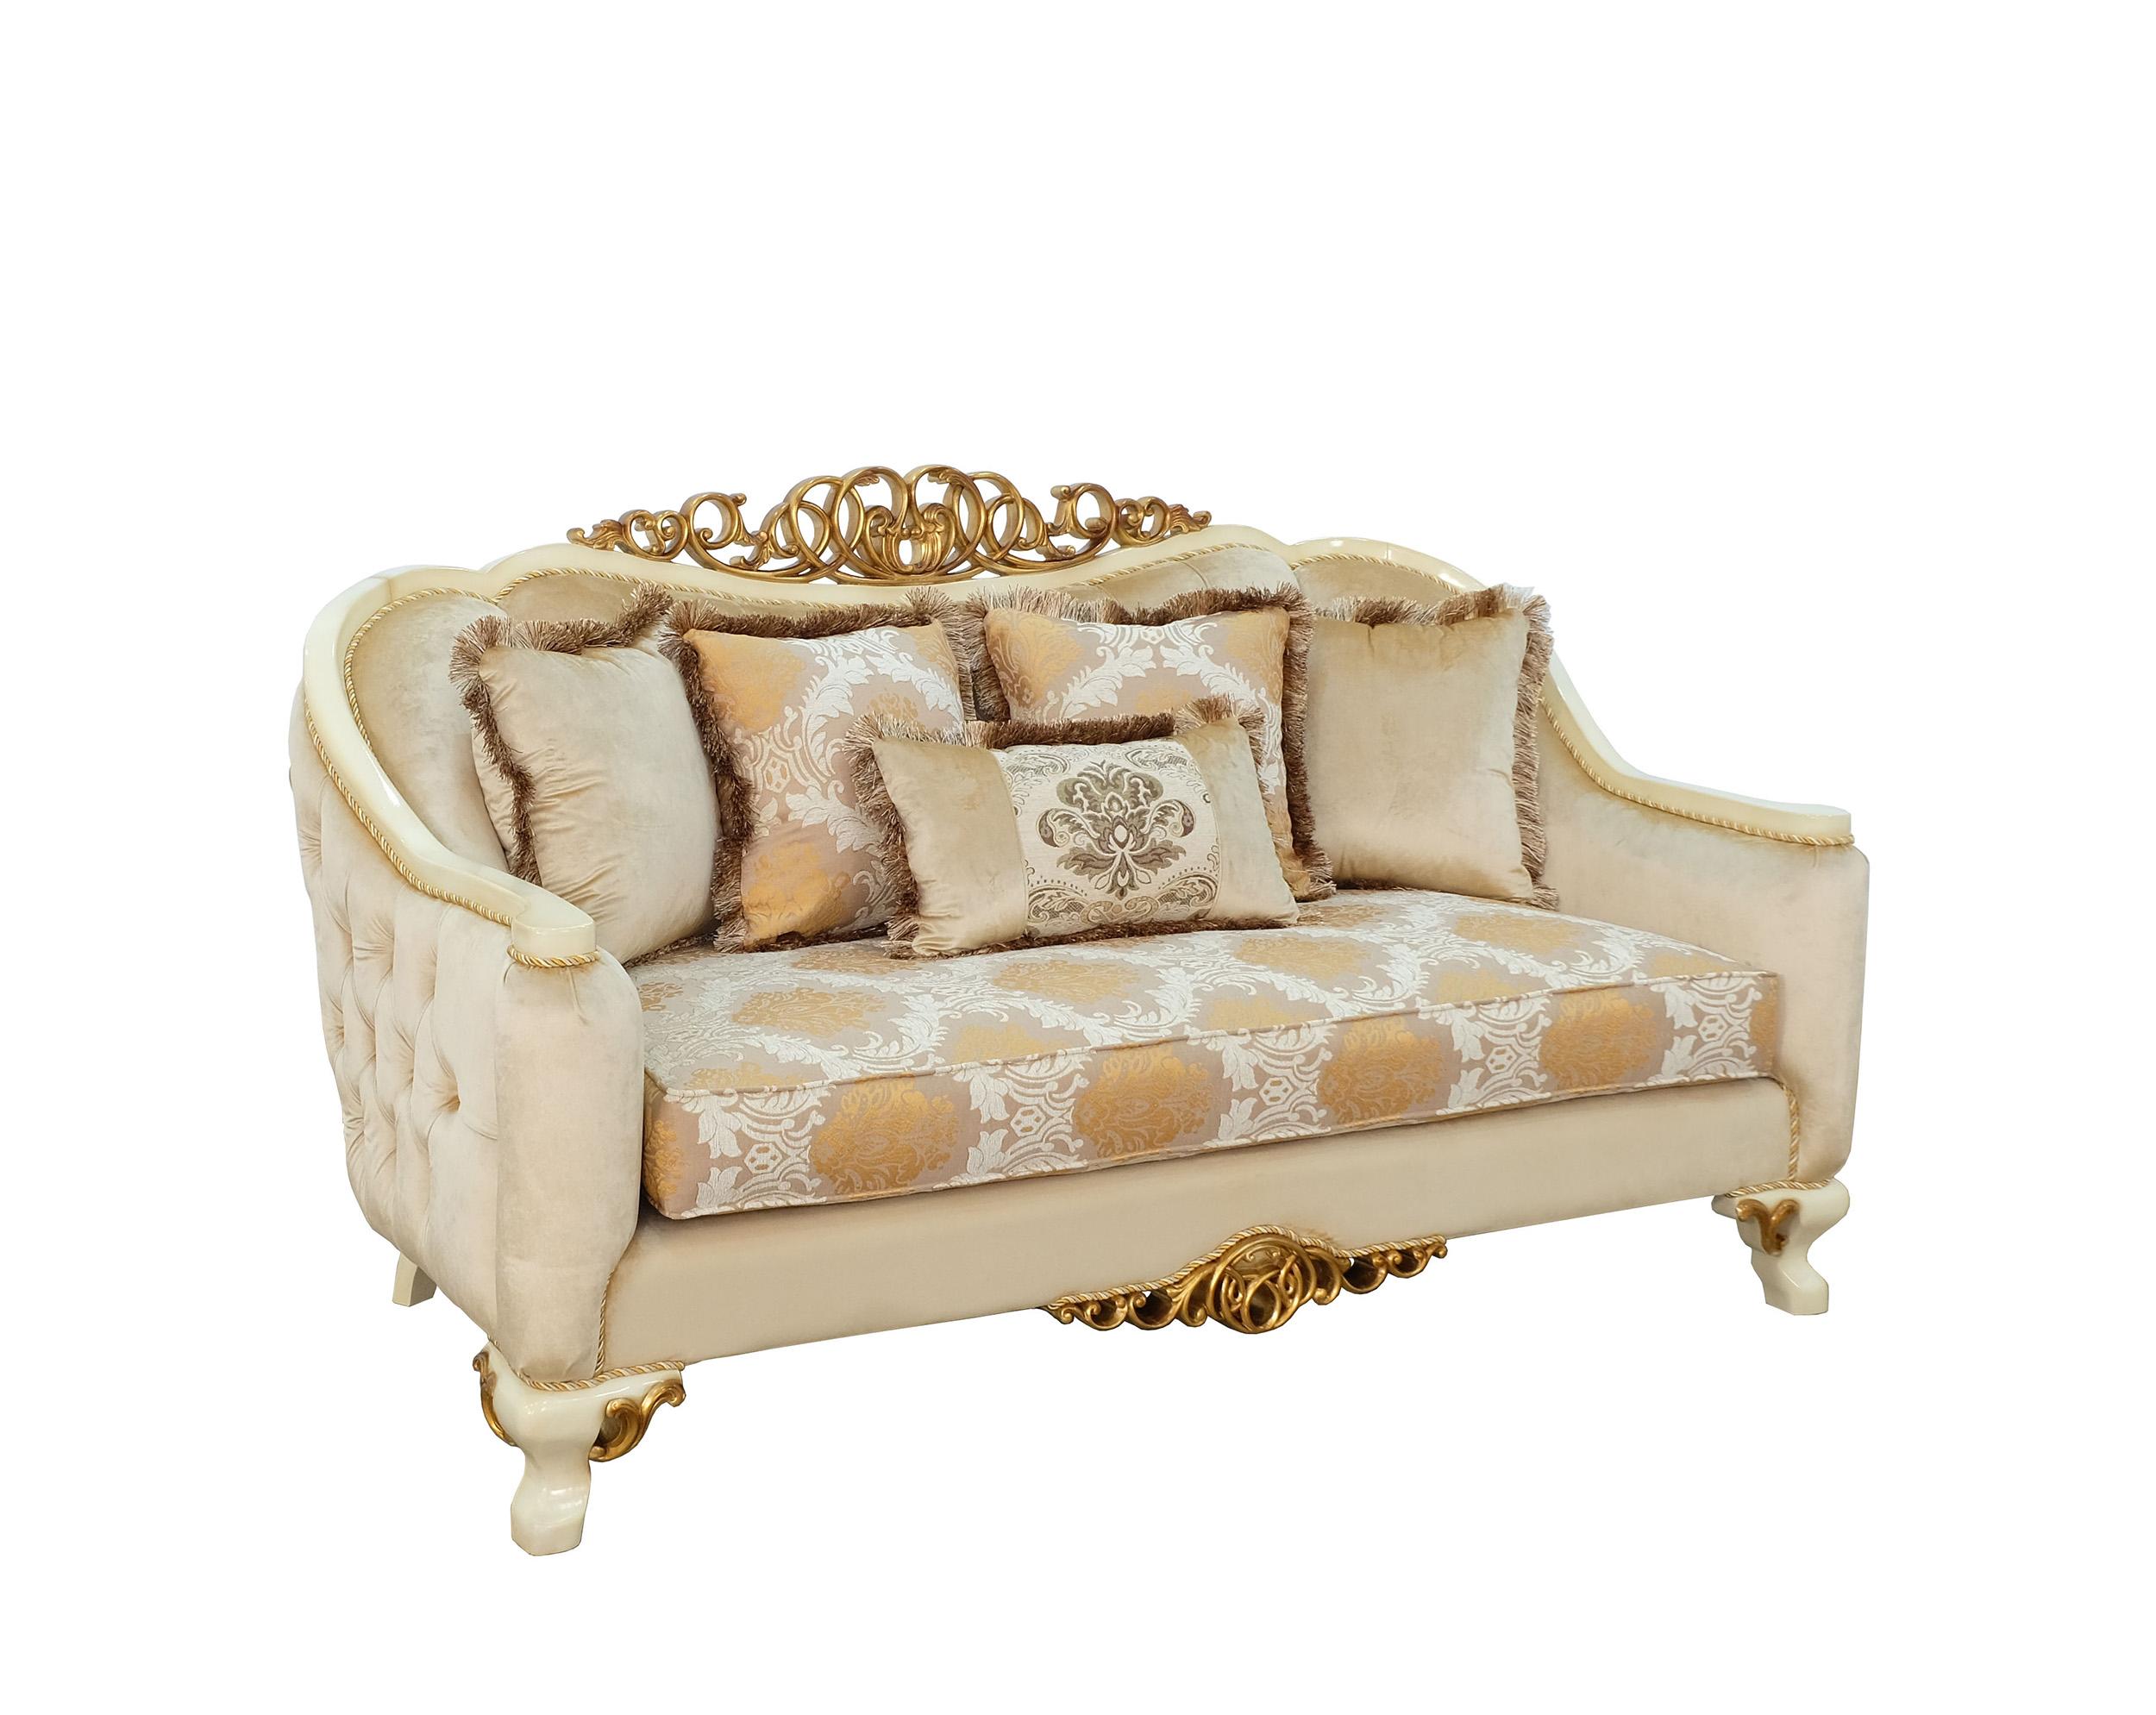 Classic, Traditional Loveseat ANGELICA 45352-L in Antique, Gold, Beige Fabric